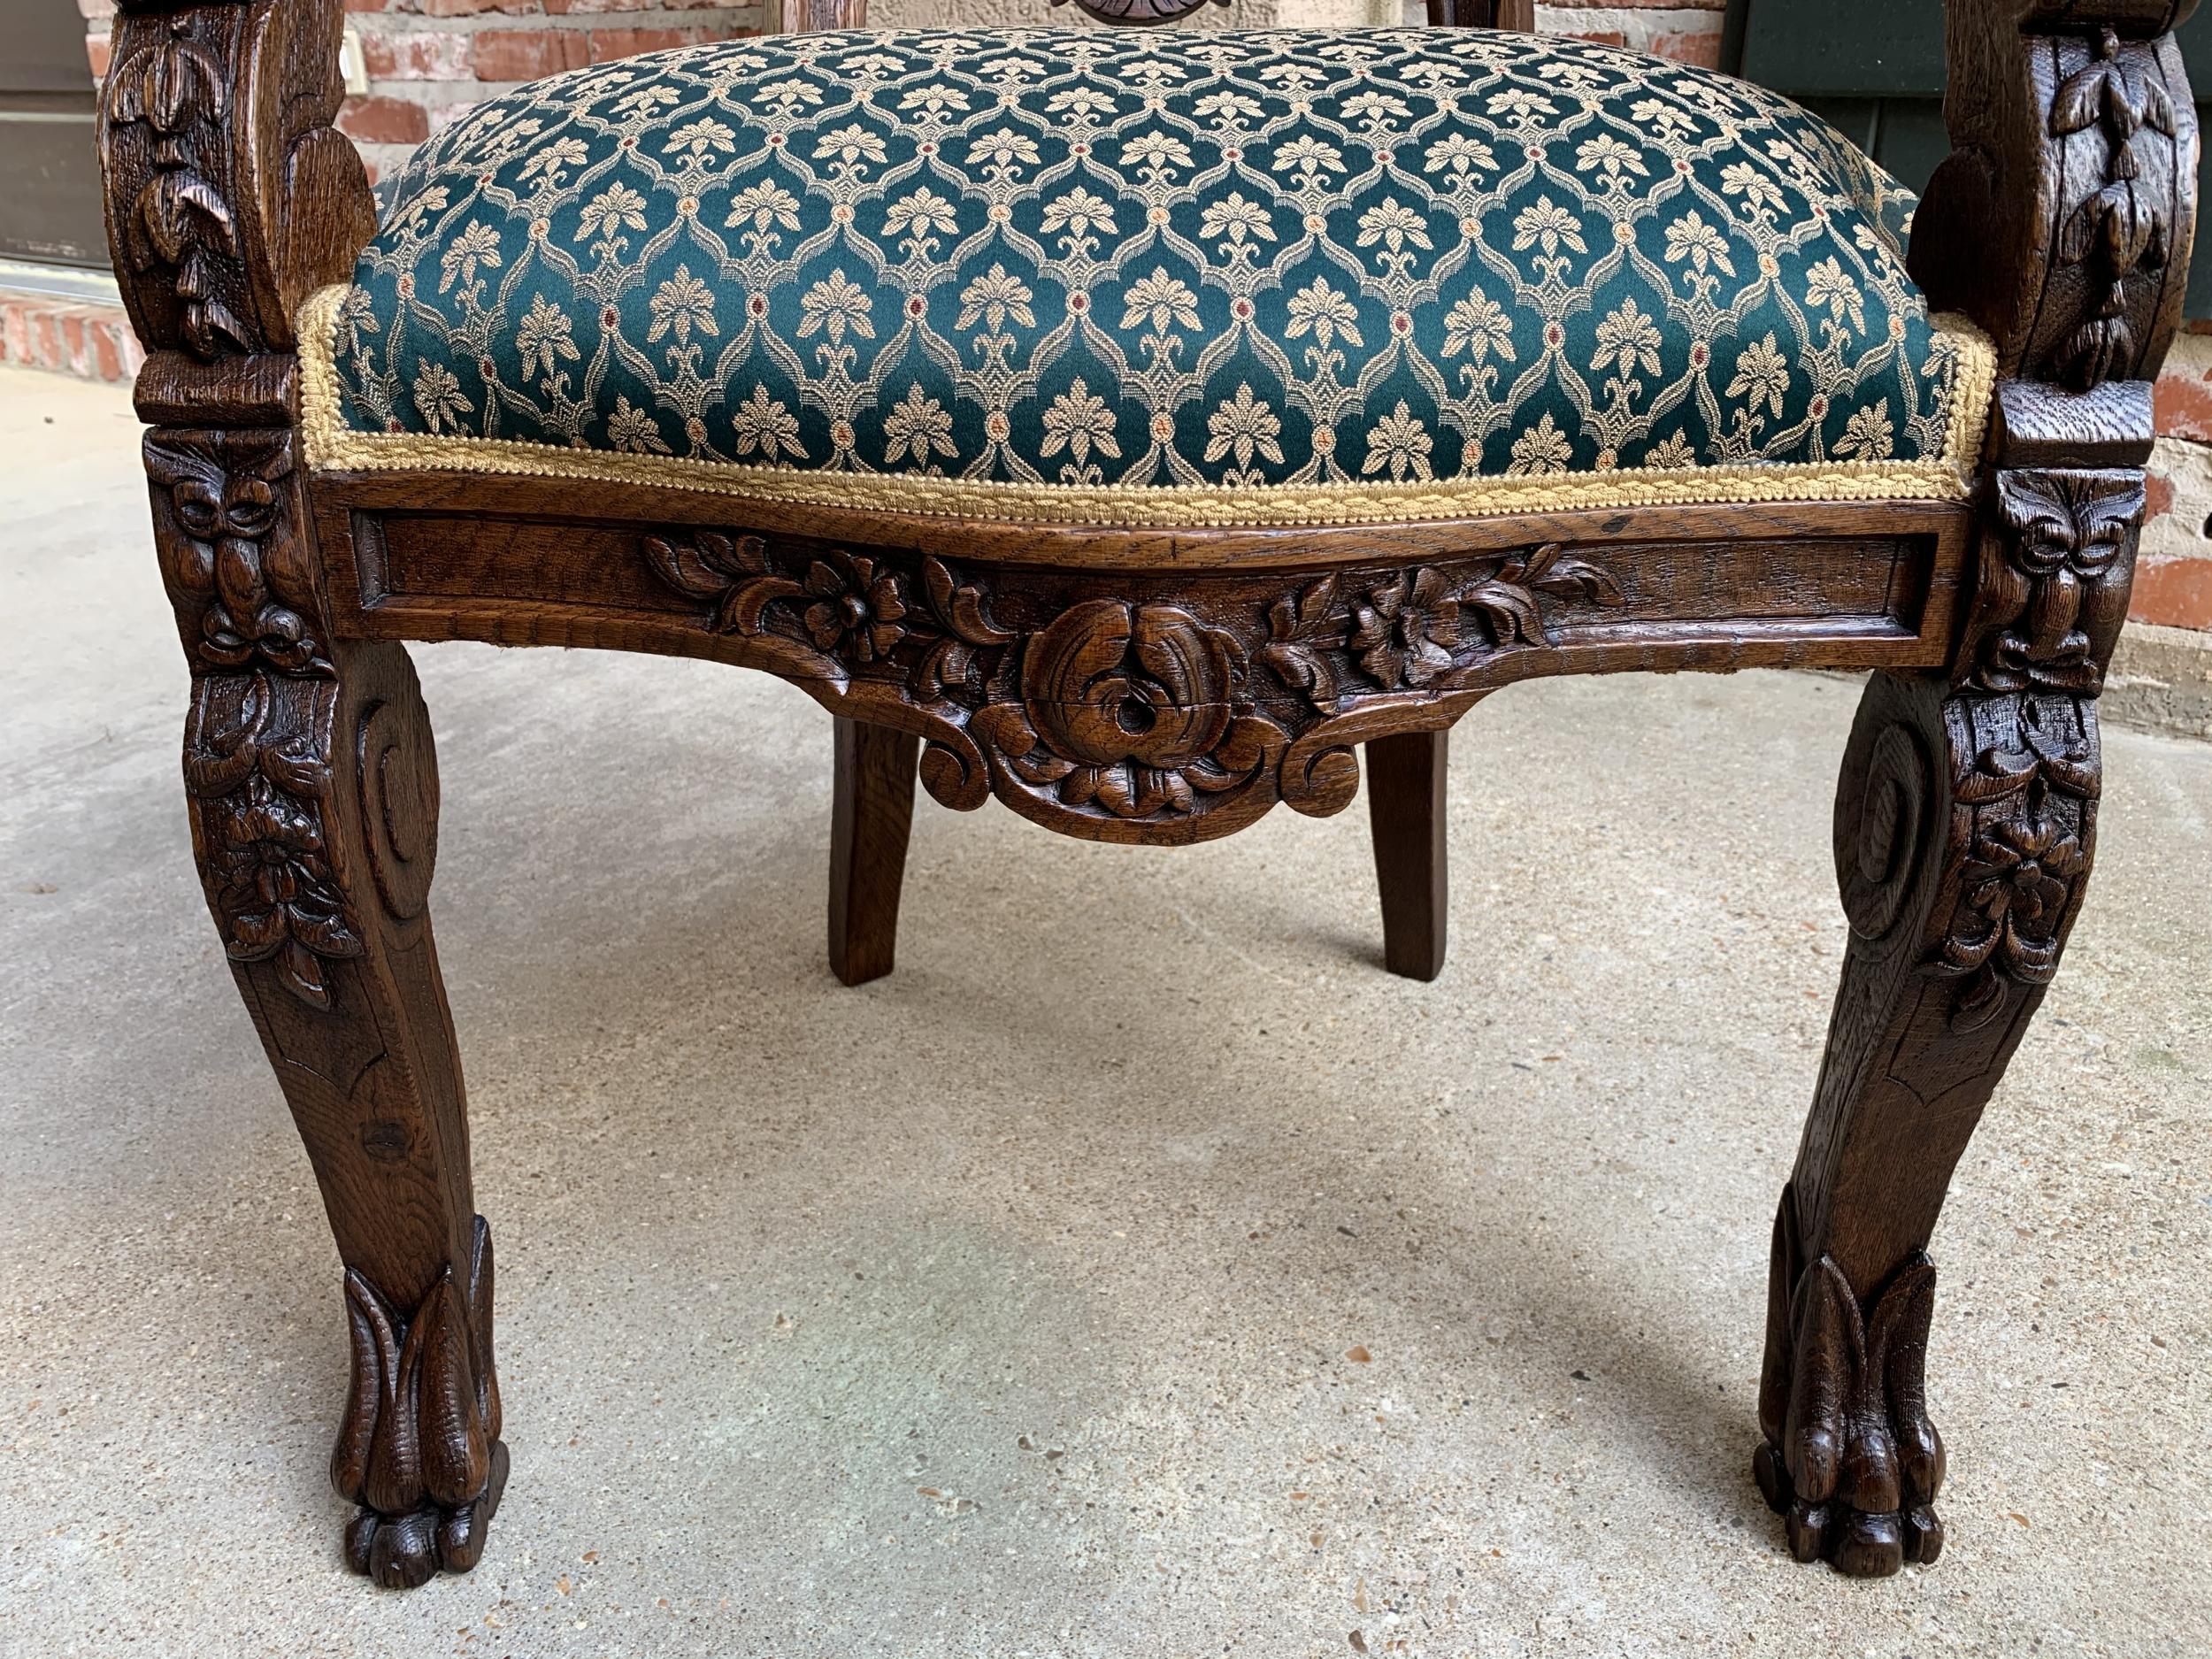 Upholstery Antique French Carved Oak Desk Hall Accent Arm Chair Renaissance, 19th century